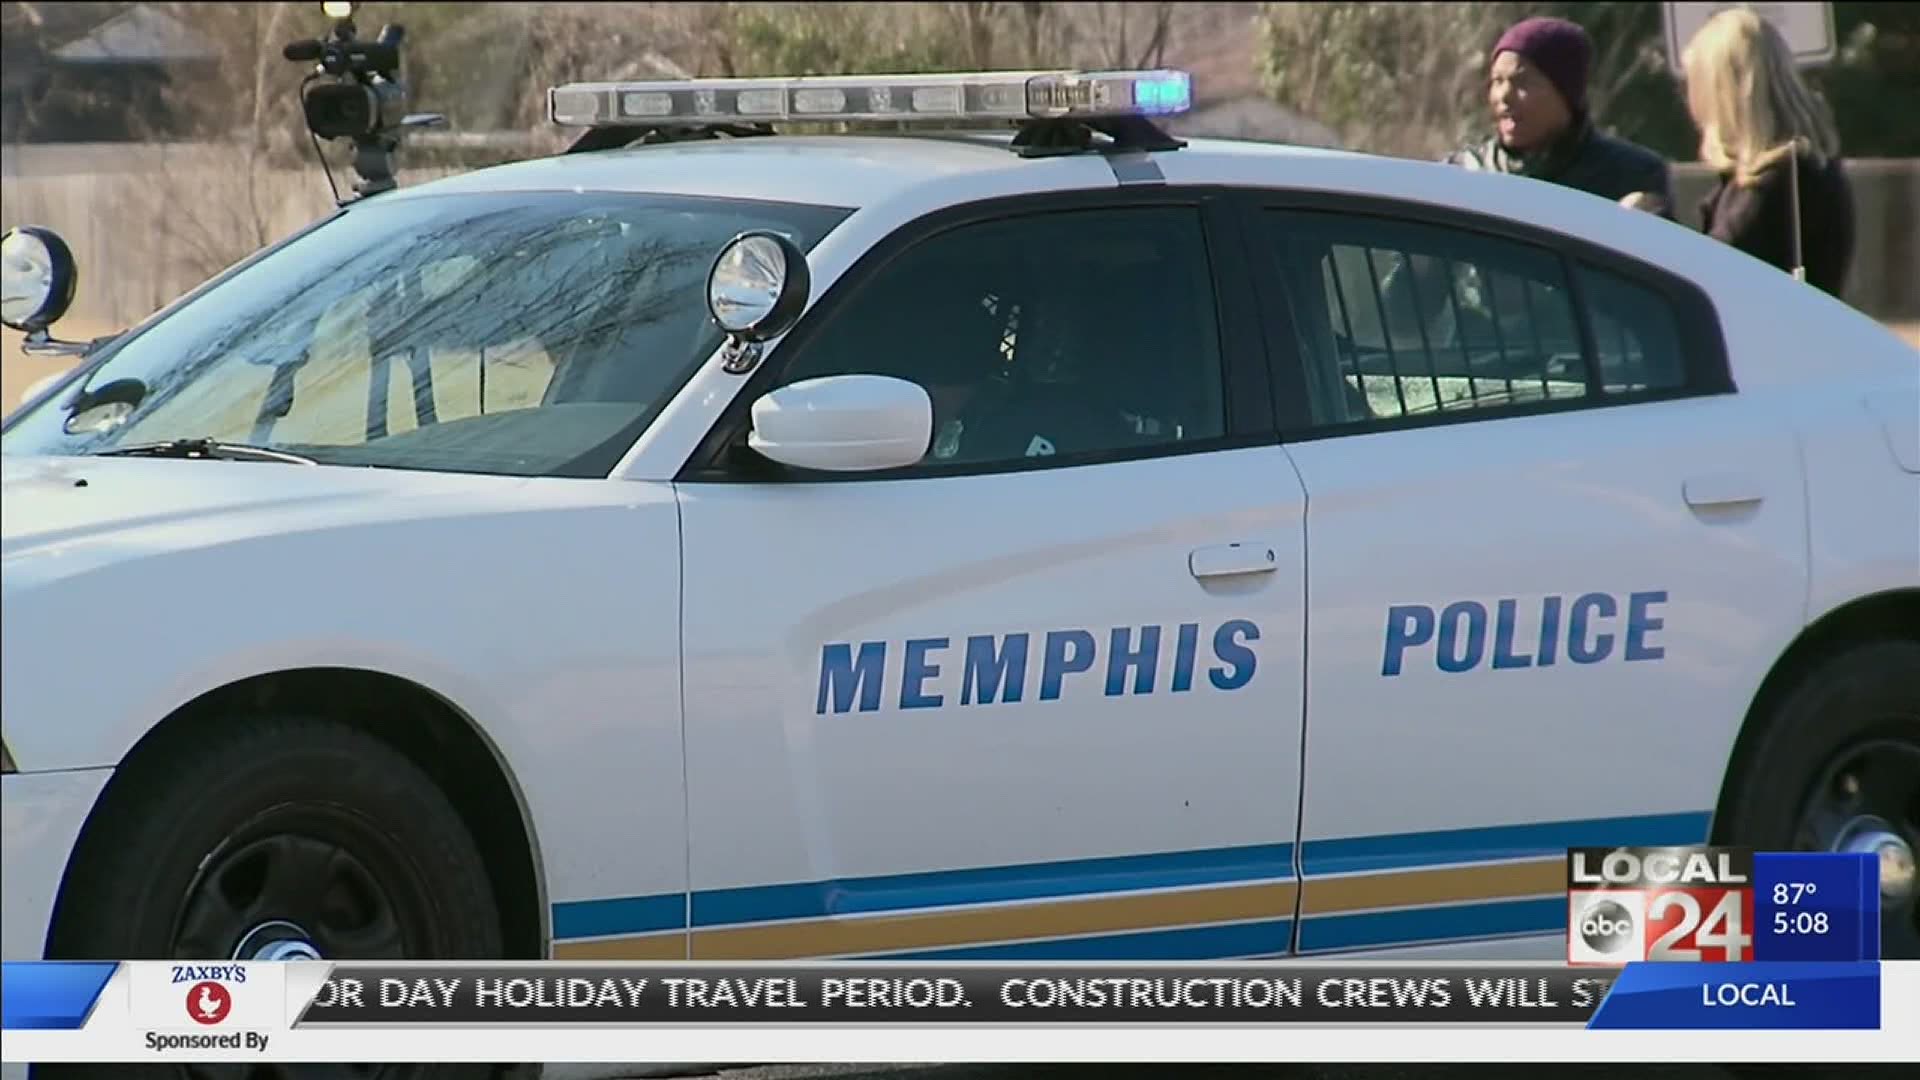 Memphis Mayor Jim Strickland said he thinks COVID-19 is partly to blame.